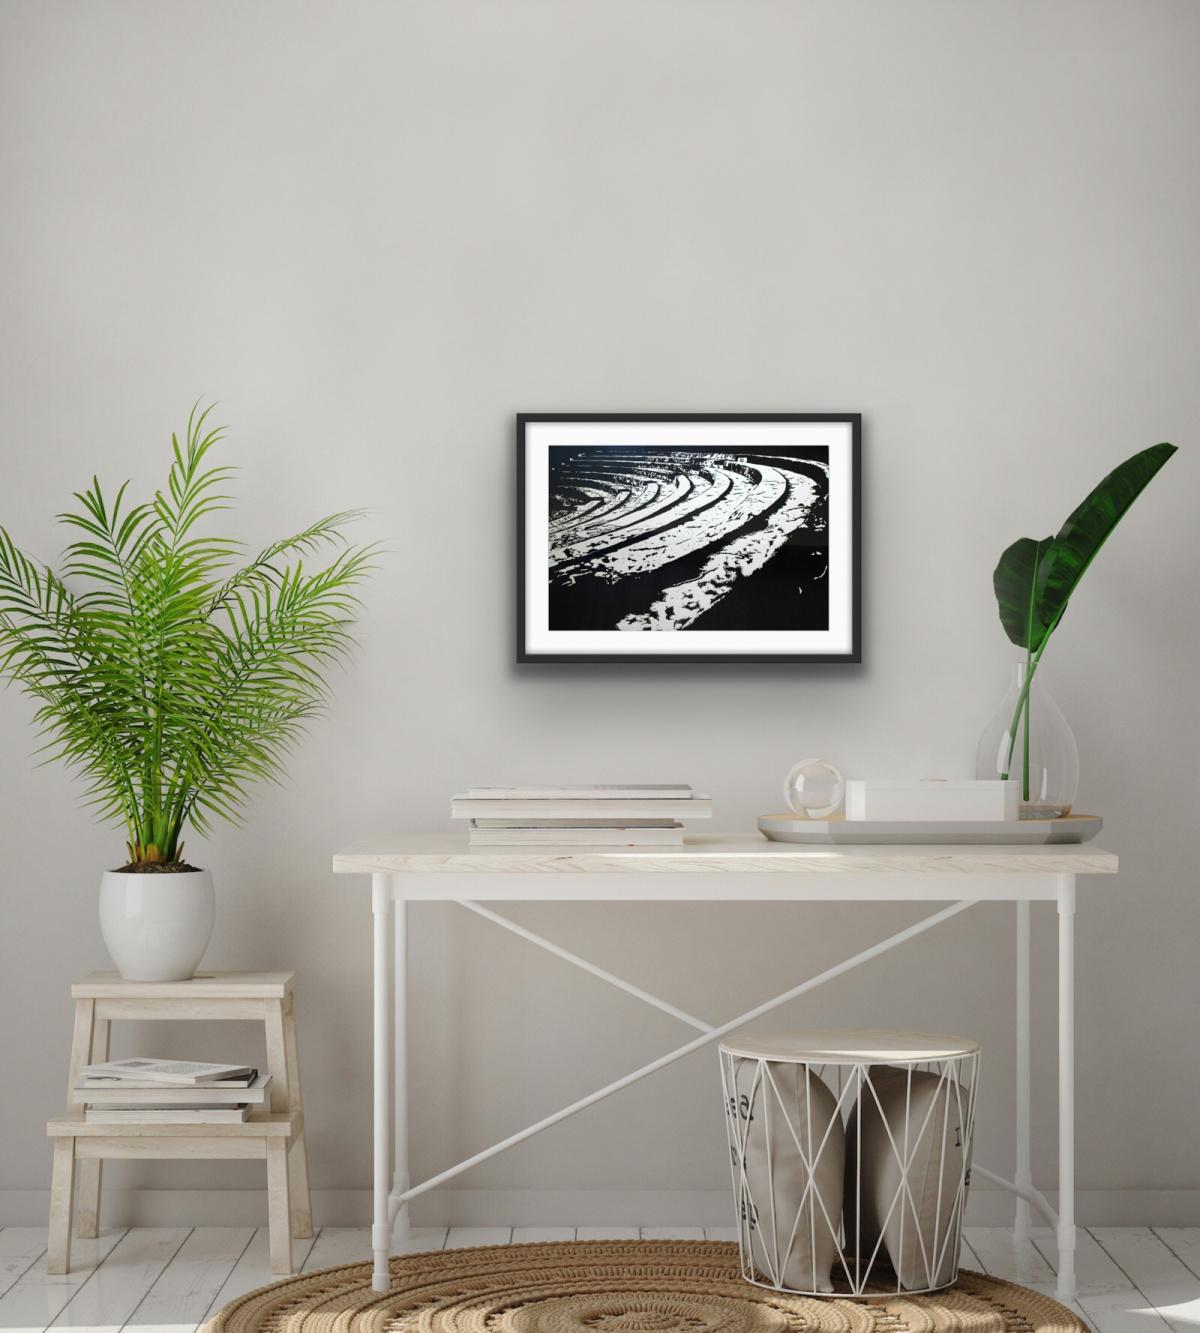 Contemporary minimalistic black & white linocut print on paper by Polish artist Jolanta Babicz. Edition is limited to 20 copies. 

Artwork is not framed. Photos with frame are only visualizations.

JOLANTA BABICZ (born in 1967)
In 2009 she graduated